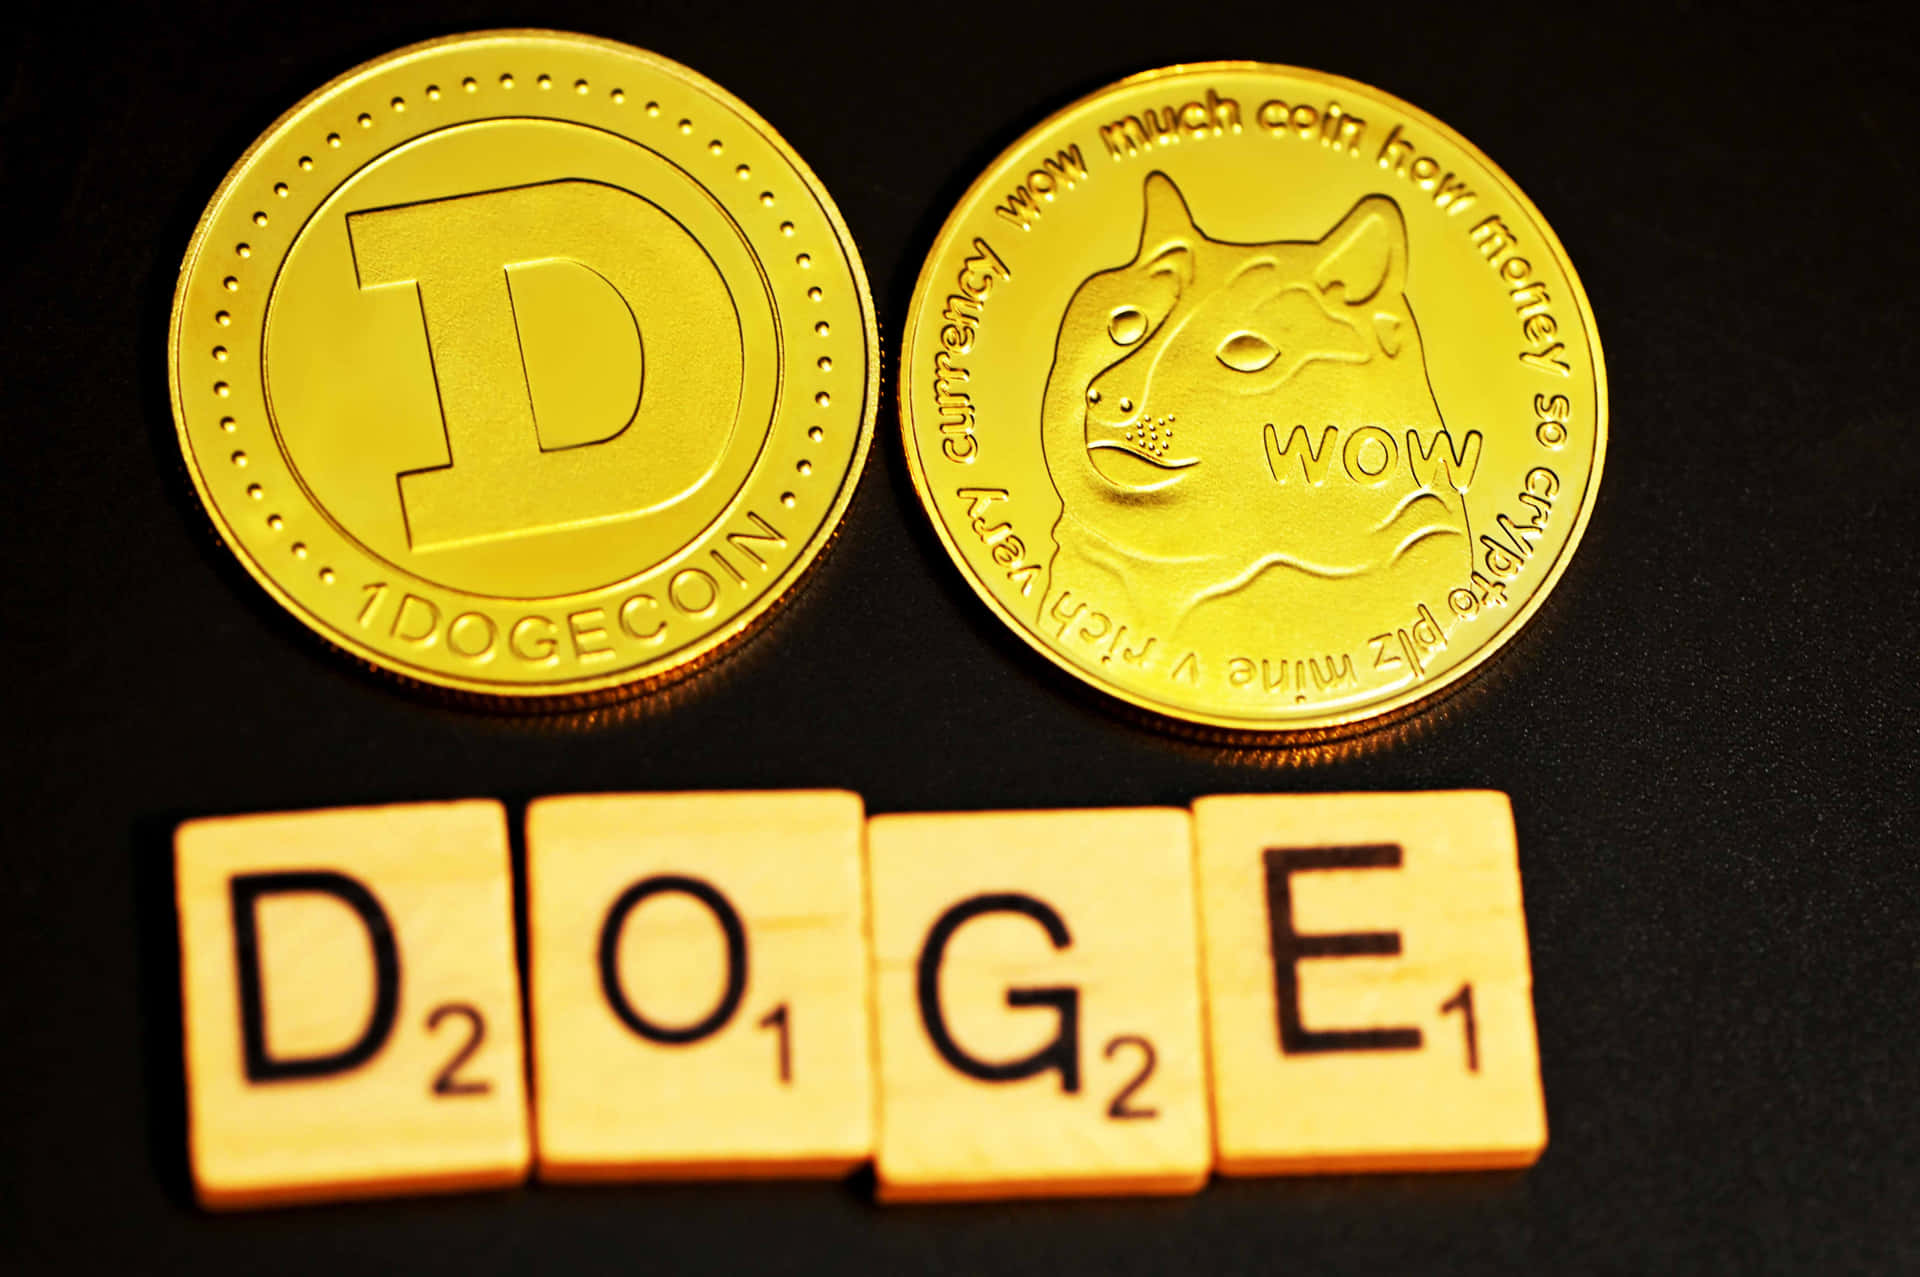 Dogecoin flying to the moon